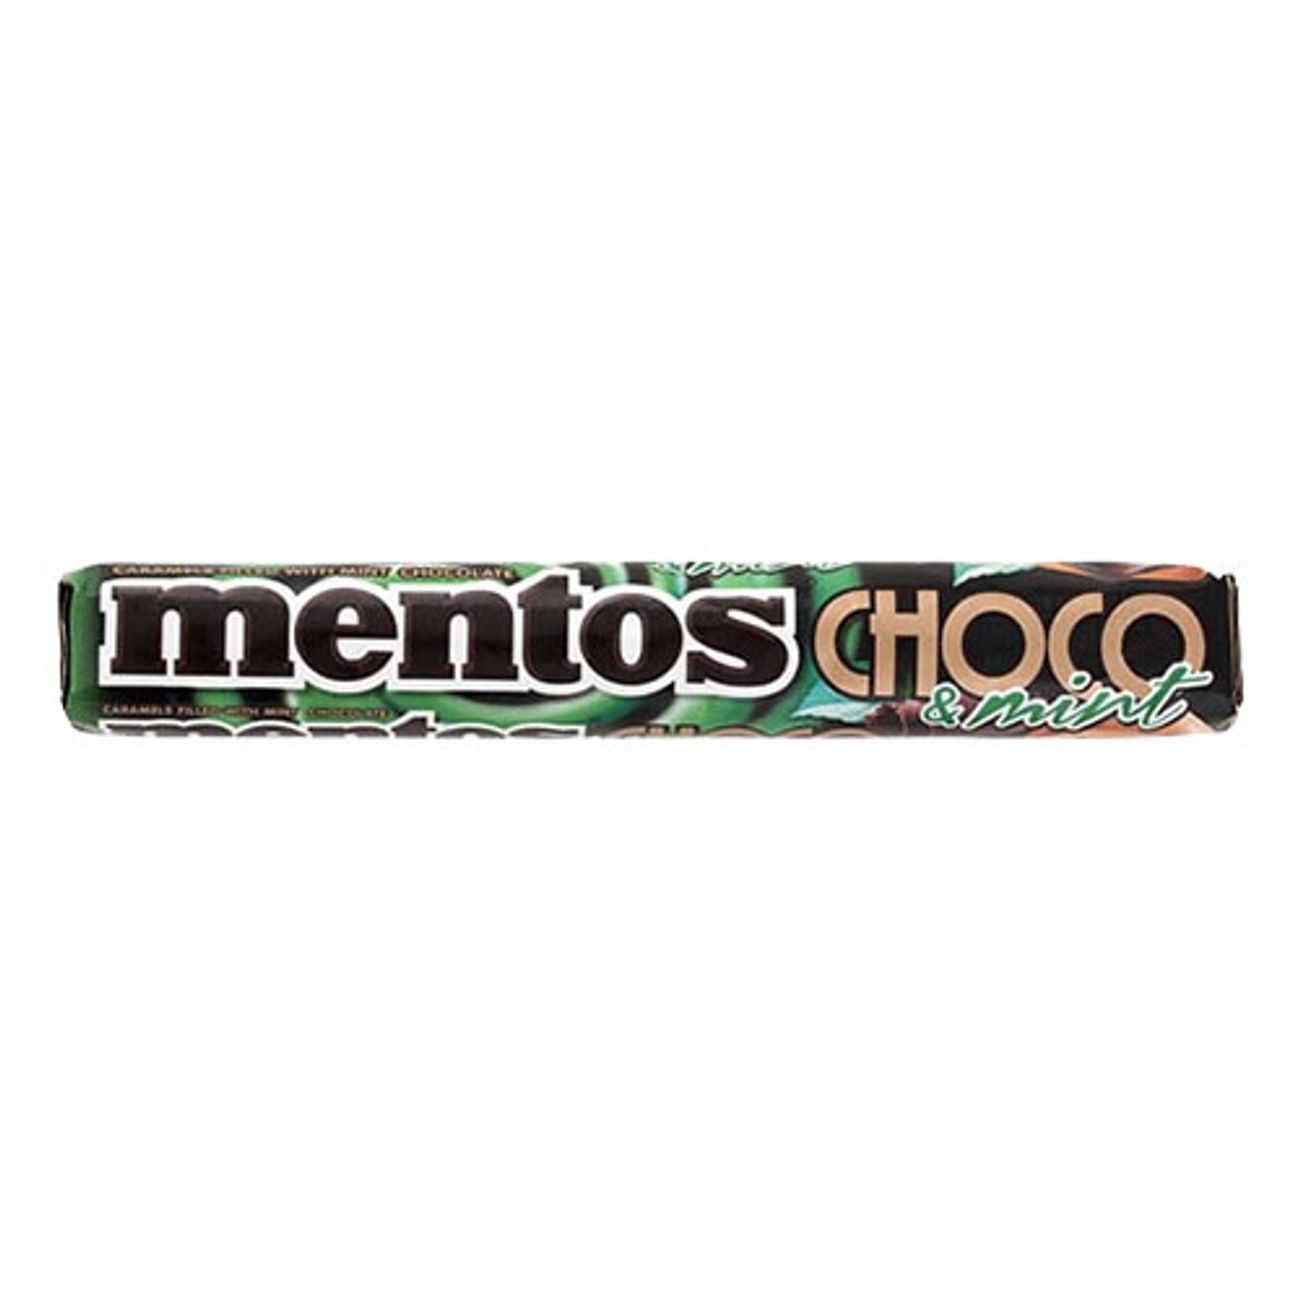 mentos-rulle-choco-mint-1